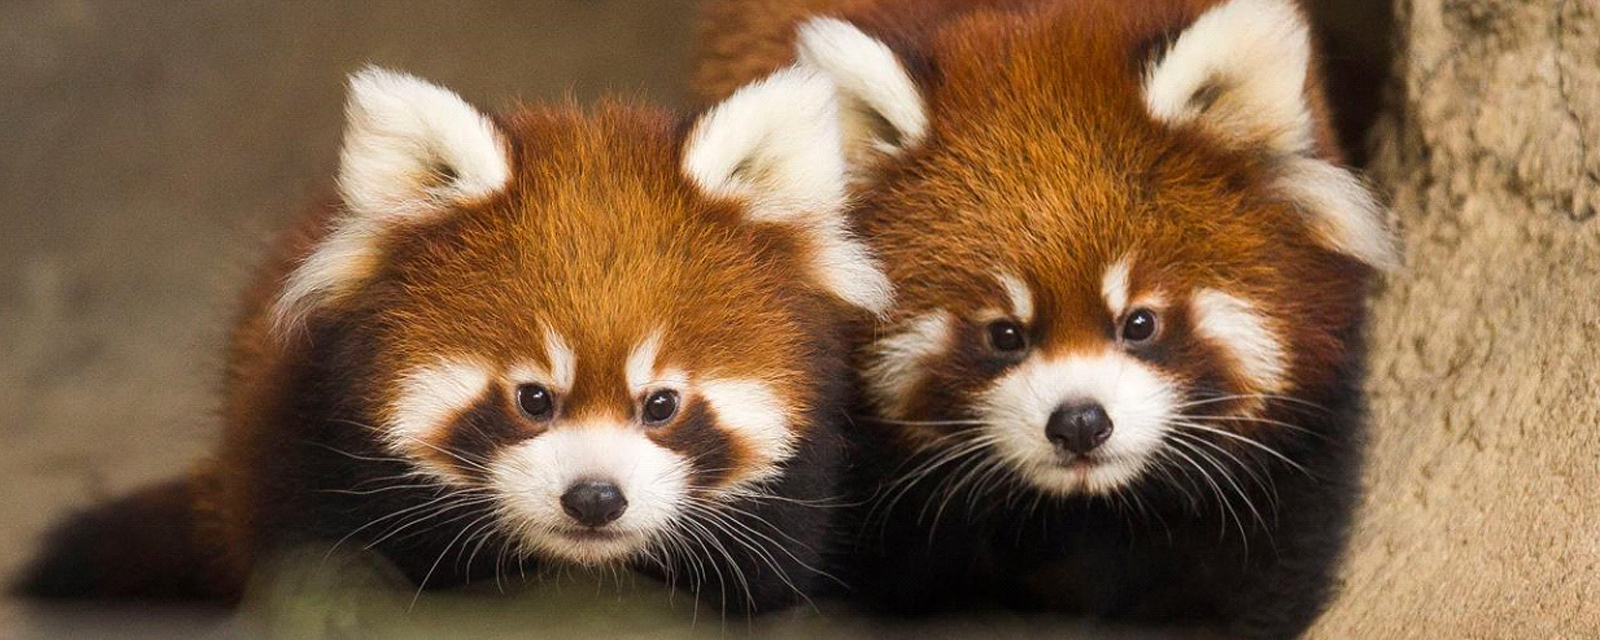 Two red pandas in exhibit